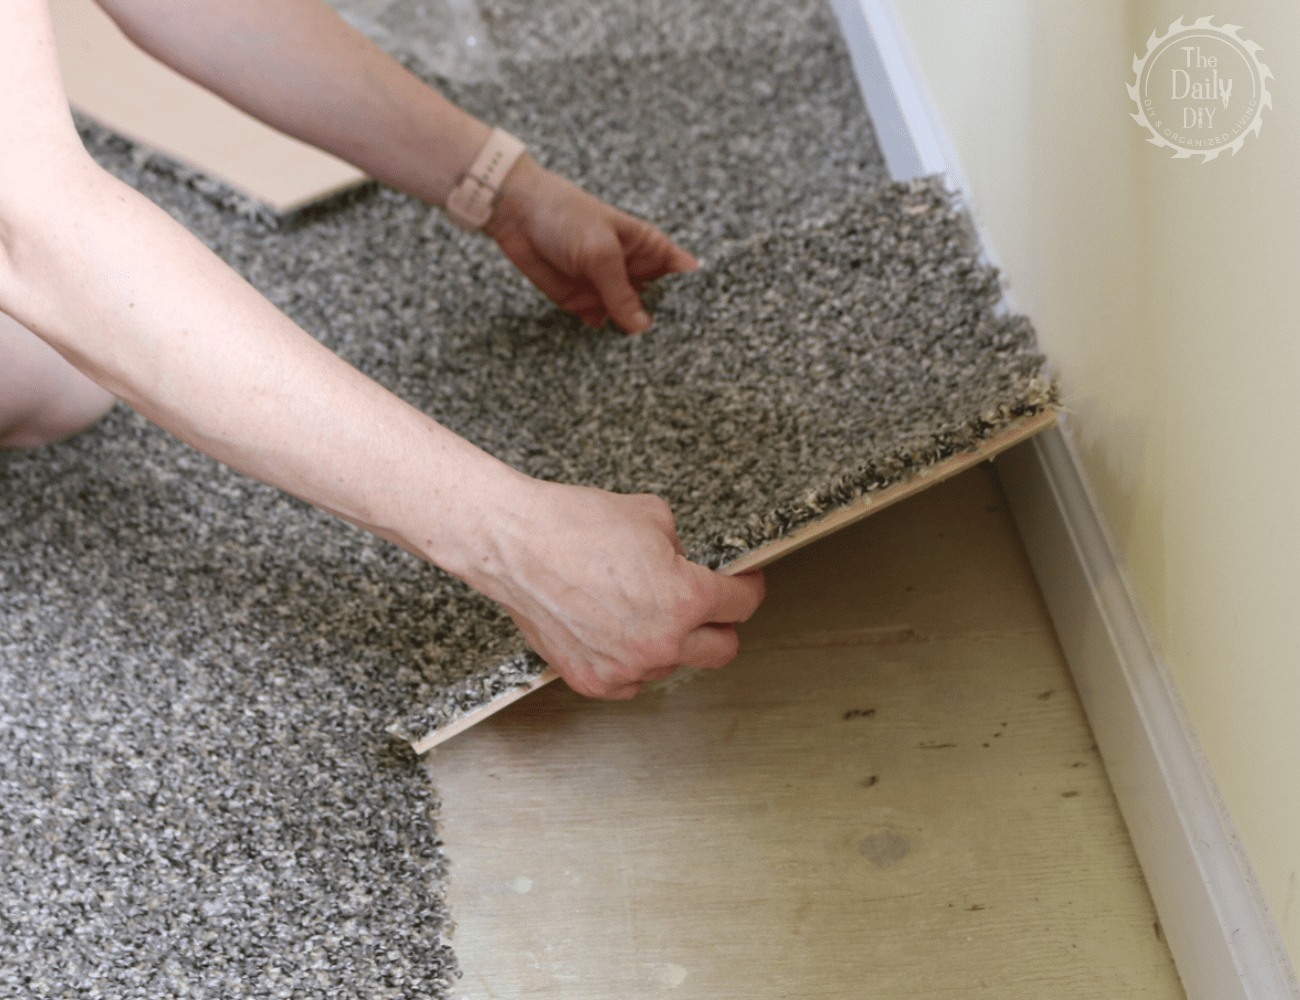 Easy DIY Carpet Install You Can Do This Weekend - The Daily DIY